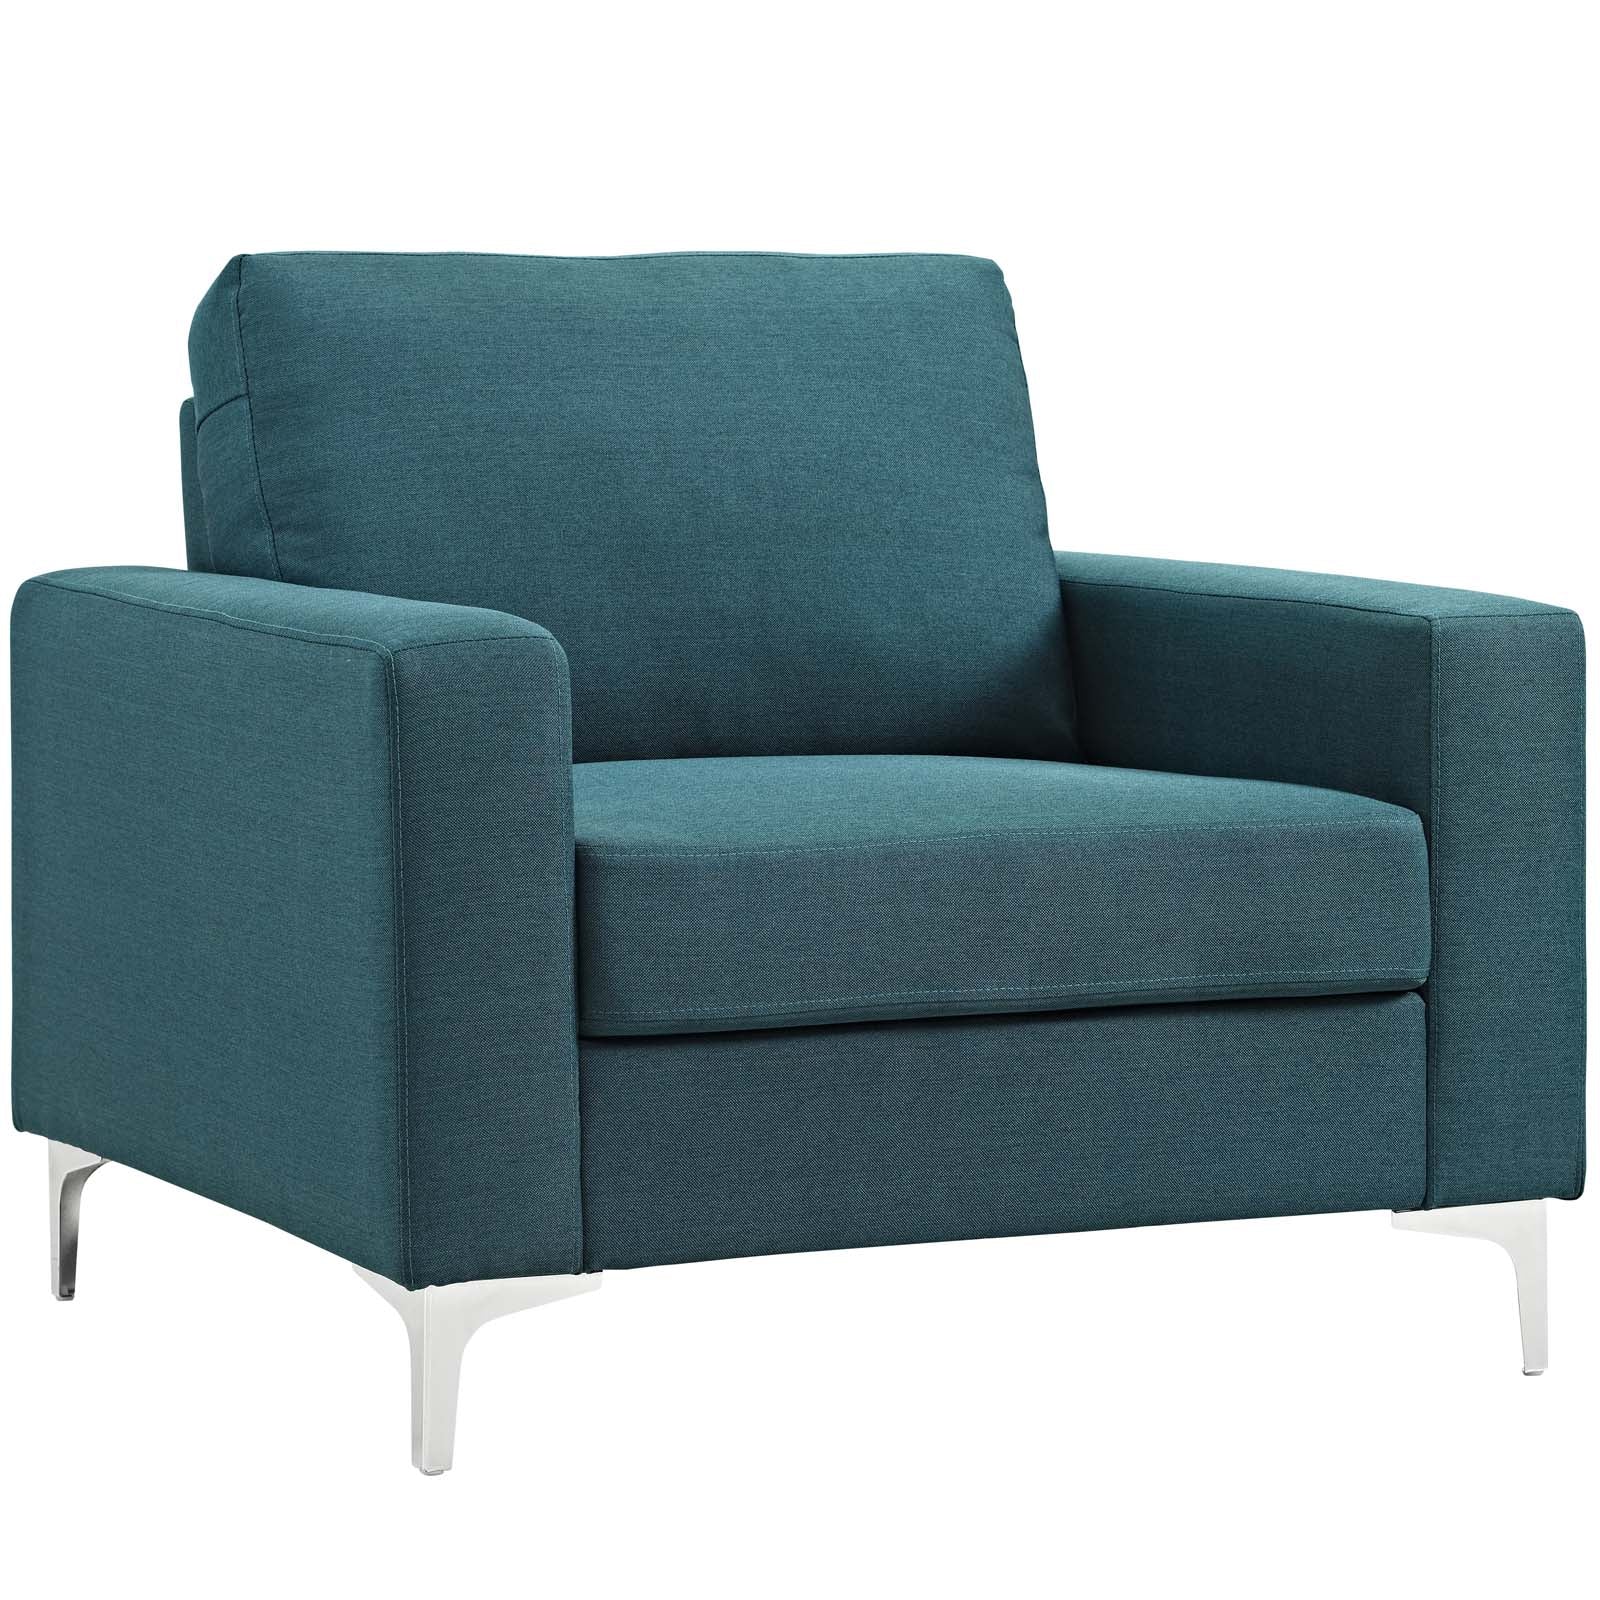 Contemporary Modern Allure  Upholstered Fabric Living Room Sofa - Club Armchairs In Steel Legs